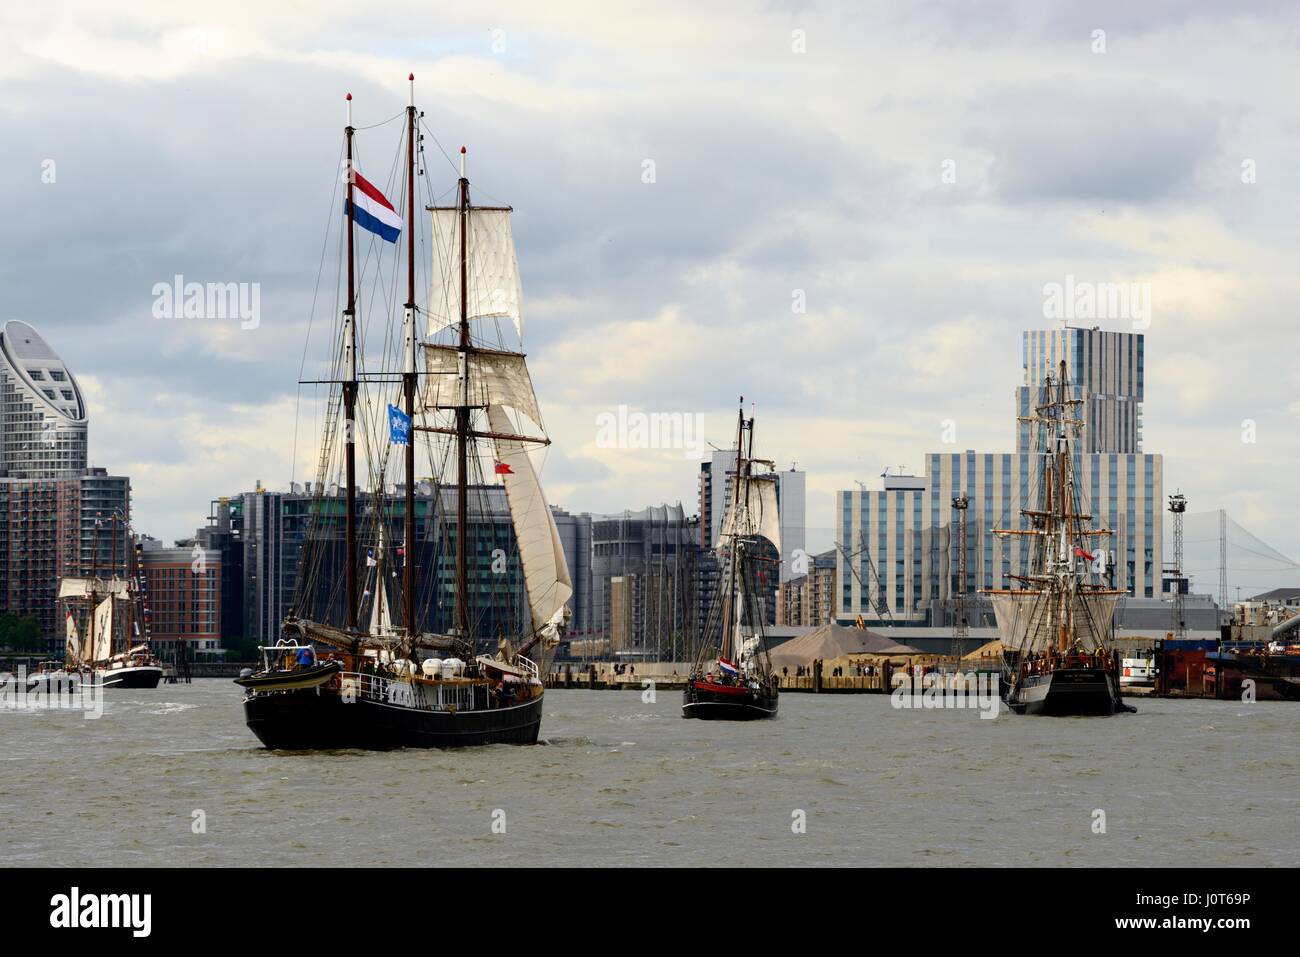 London, UK. 16th Apr, 2017. The tall ships regatta leaving London. Sailing down the Thames river from Greenwich to sail across the Atlantic to Canada. Photo taken on the south bank of the Thames between Greenwich and the O2 centre, on Sunday 16.4.2017. Credit: Mika Schick/Alamy Live News Stock Photo